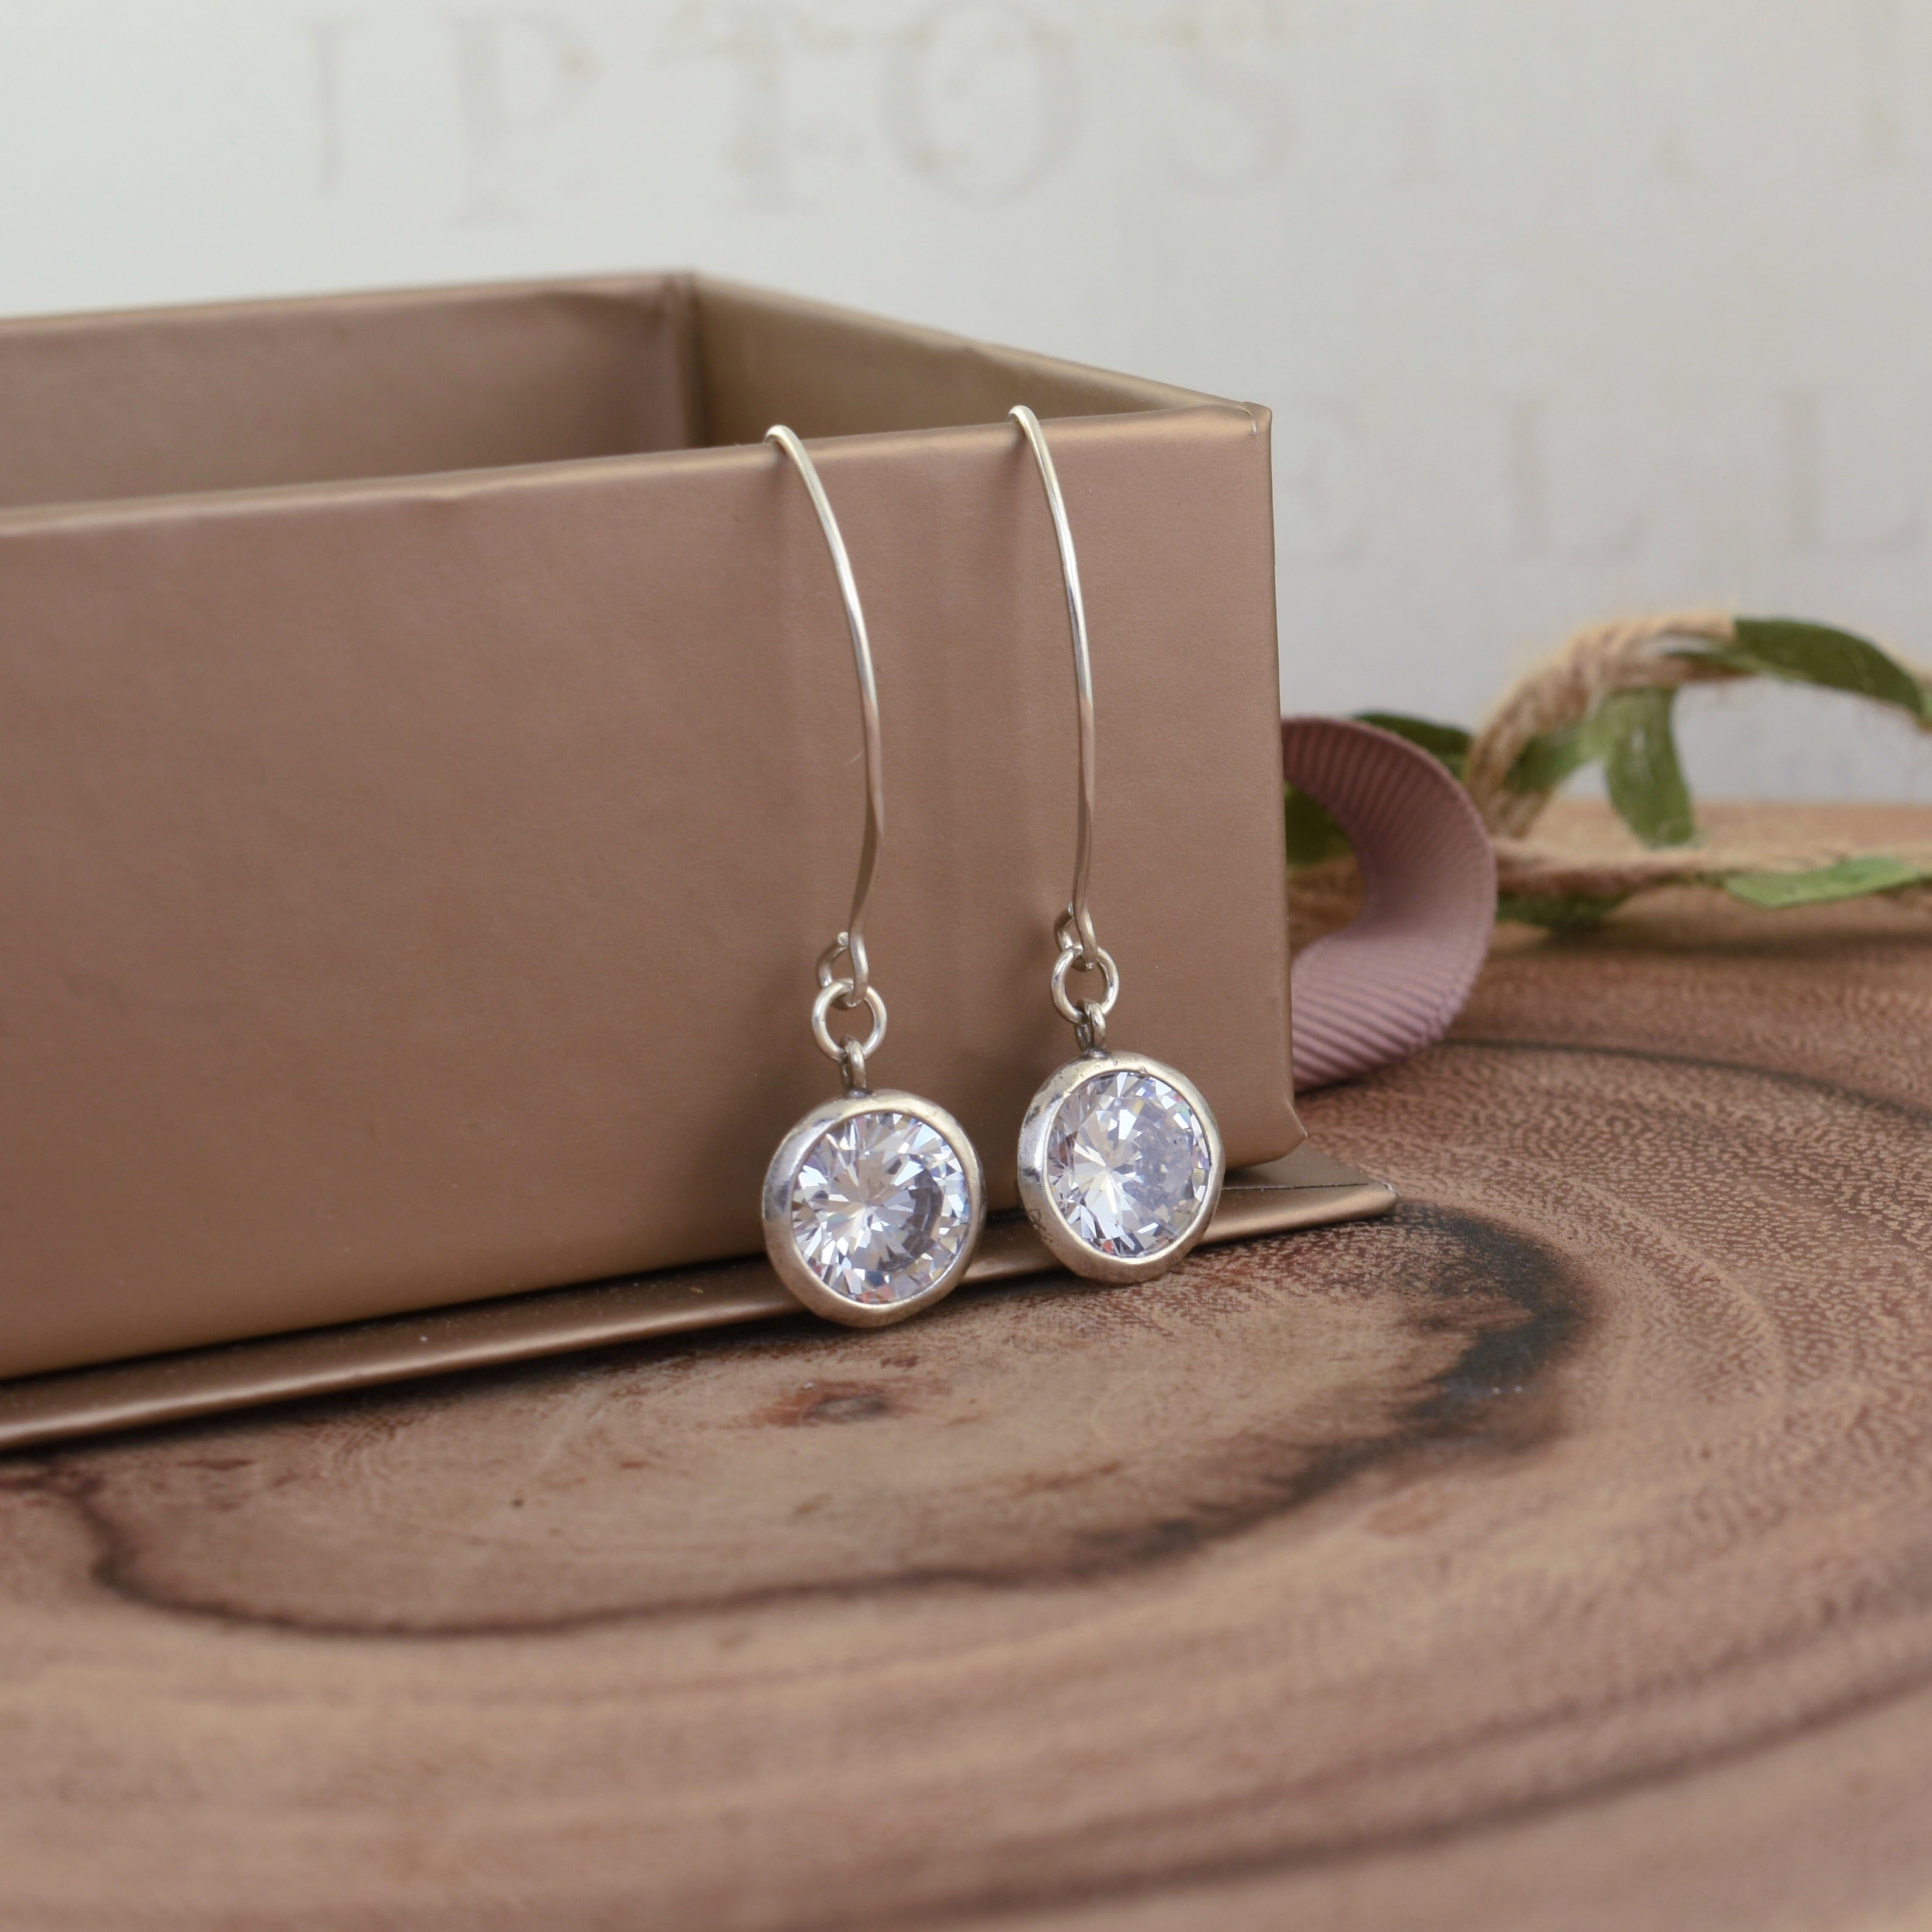 .925 sterling silver earrings with round CZ